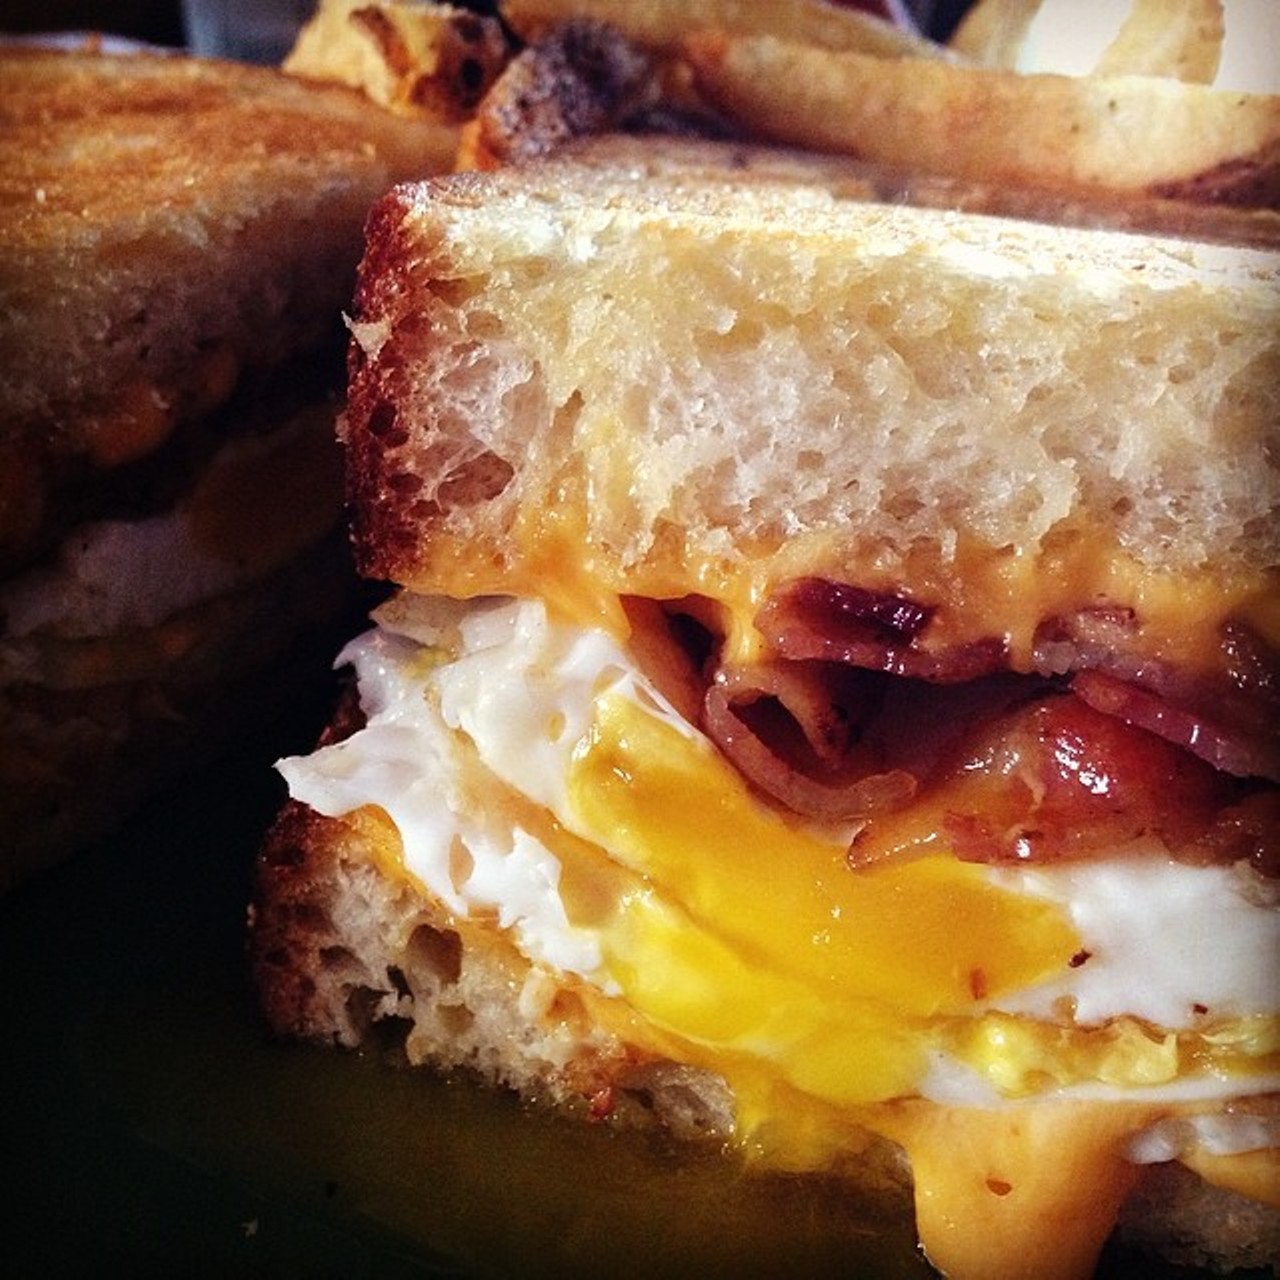 Does it get any better? Two pieces of grilled crunchy bread crammed with fried eggs, tons of American cheese, and an obscene amount of killer bacon. Breakfast in a sandwich. Melt Bar and Grilled is located at 13463 Cedar Rd. Call 216.965.0988 or visit meltbarandgrilled.com for more information.